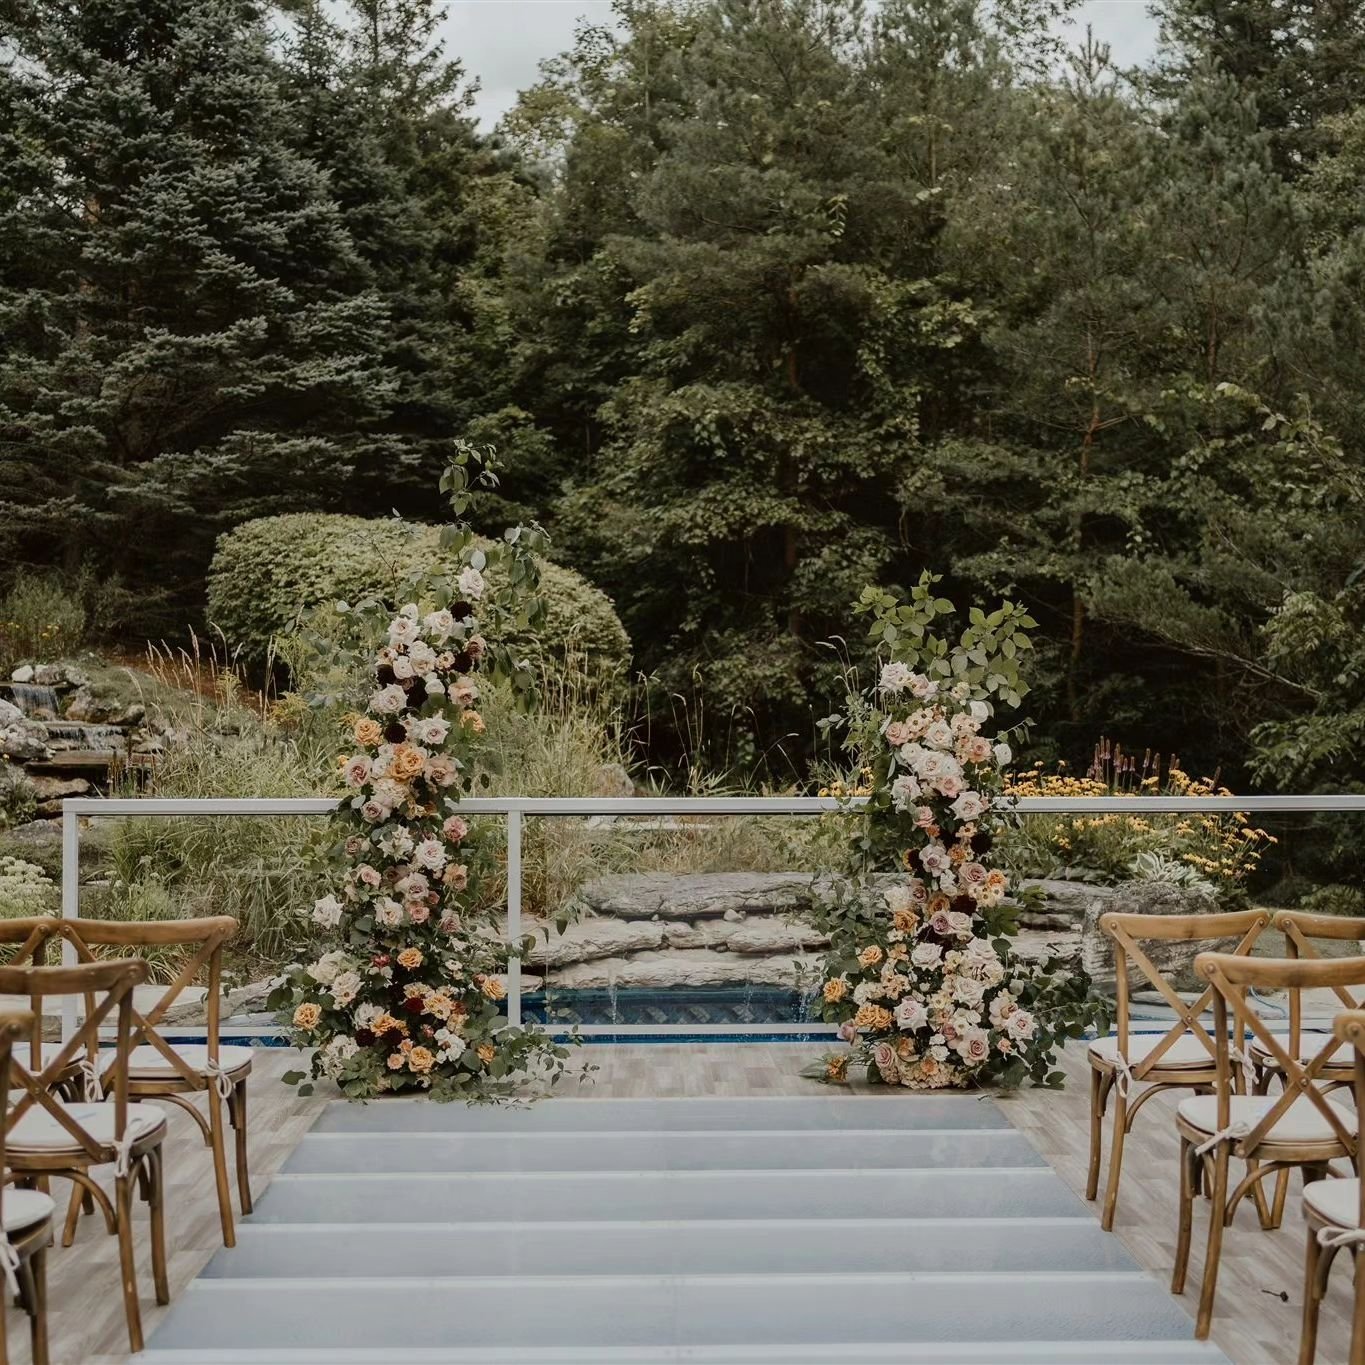 The most enchanting garden for a wedding ceremony... A little slice of heaven.

Cissy and Adam | Private Estate Planning

📷 @jessilynnwongphotography